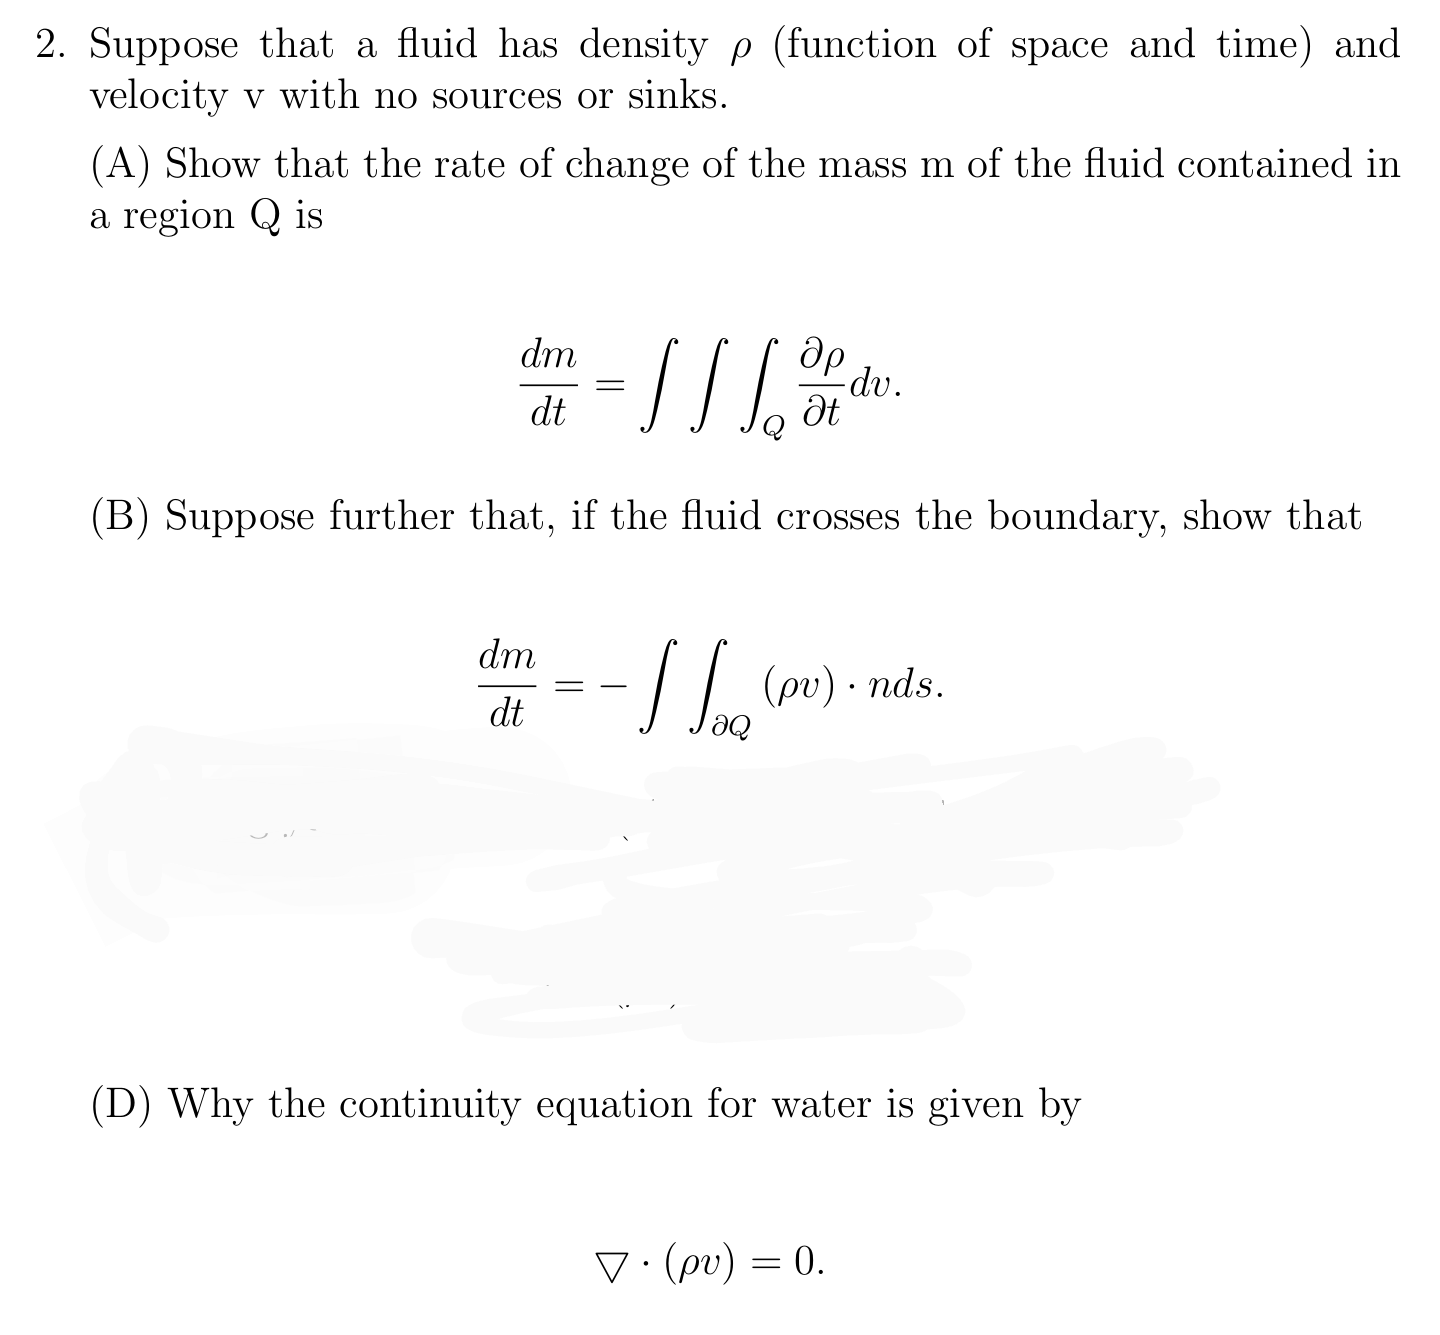 Suppose that a fluid has density p (function of space and time) and
velocity v with no sources or sinks.
(A) Show that the rate of change of the mass m of the fluid contained in
a region Q is
dm
dp
-dv.
dt
(B) Suppose further that, if the fluid crosses the boundary, show that
dm
- / | (pv) - nds.
= -
dt
(D) Why the continuity equation for water is given by
V:(pv) = 0.
